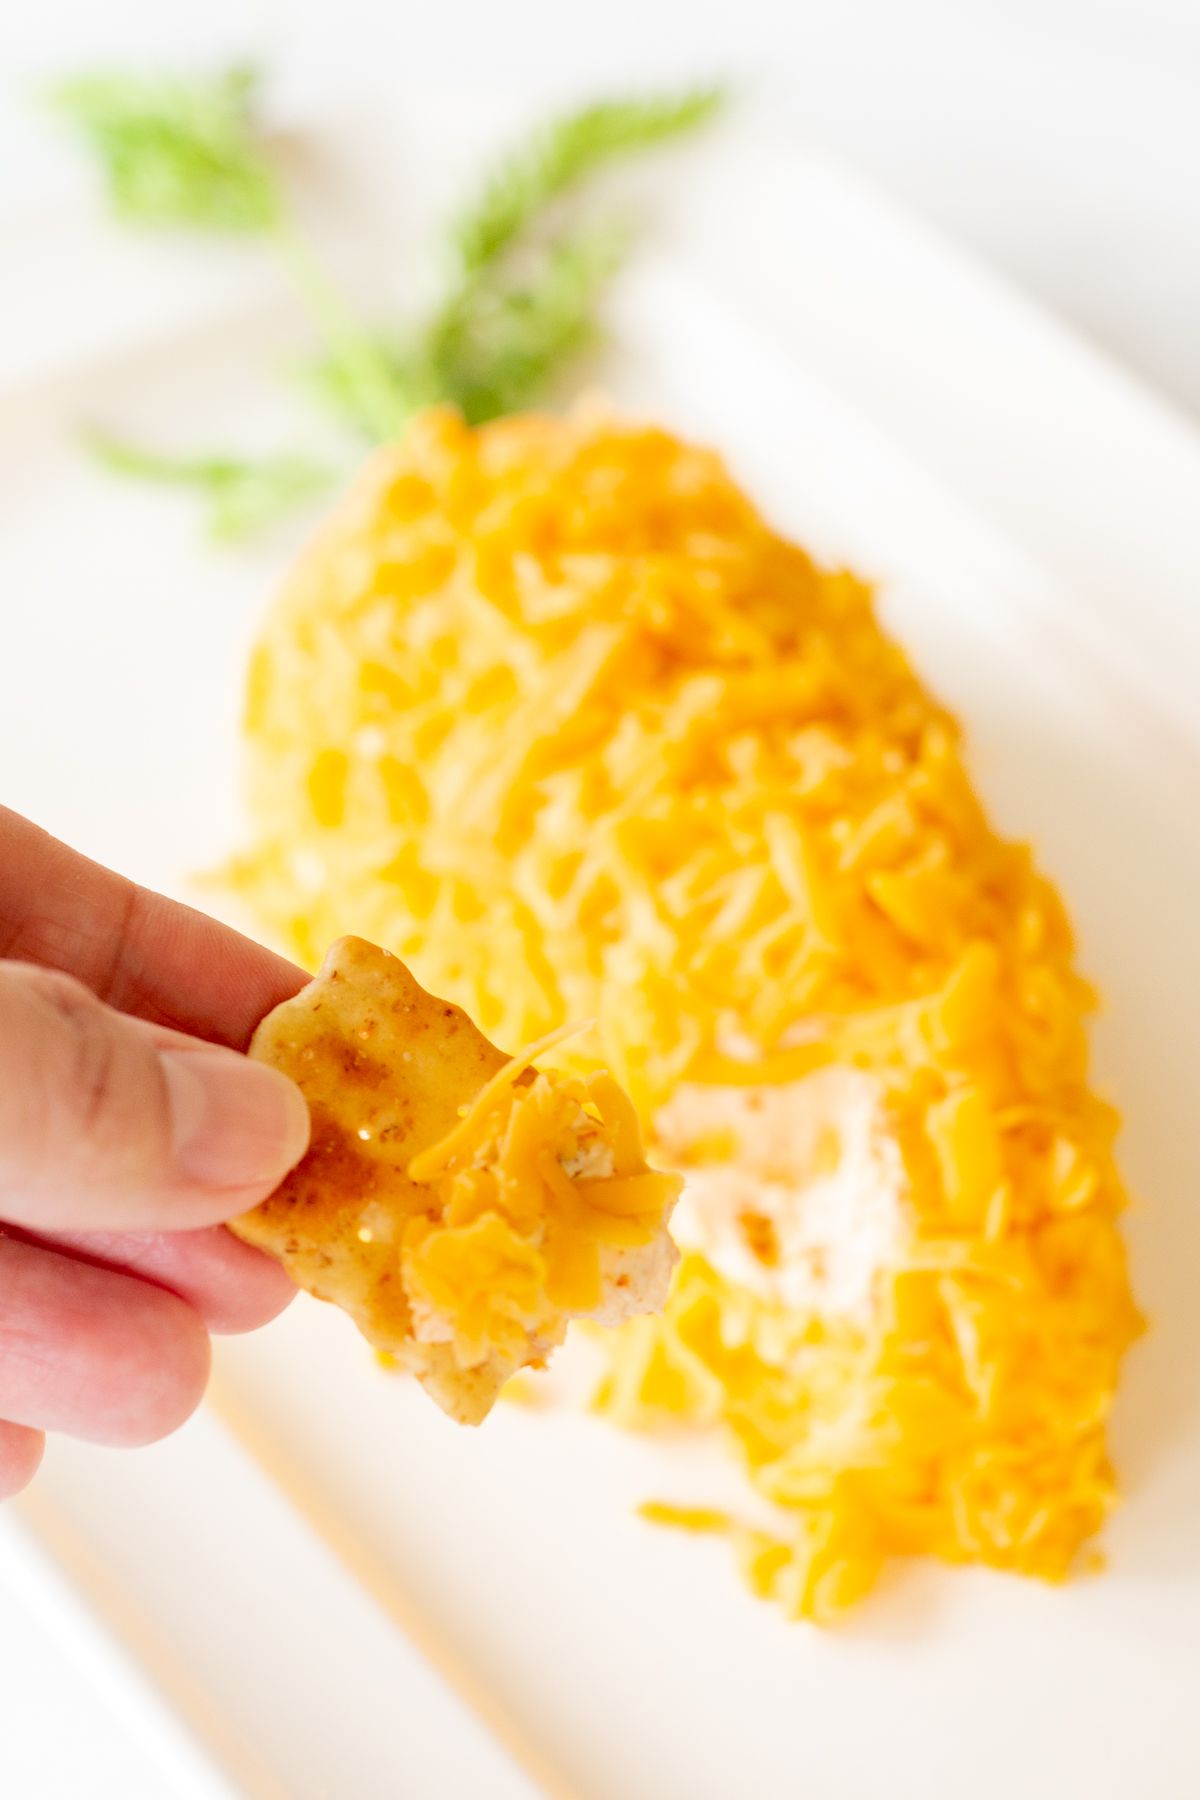 A carrot cheese ball on a white platter. A hand has removed a serving onto a cracker in the foreground.